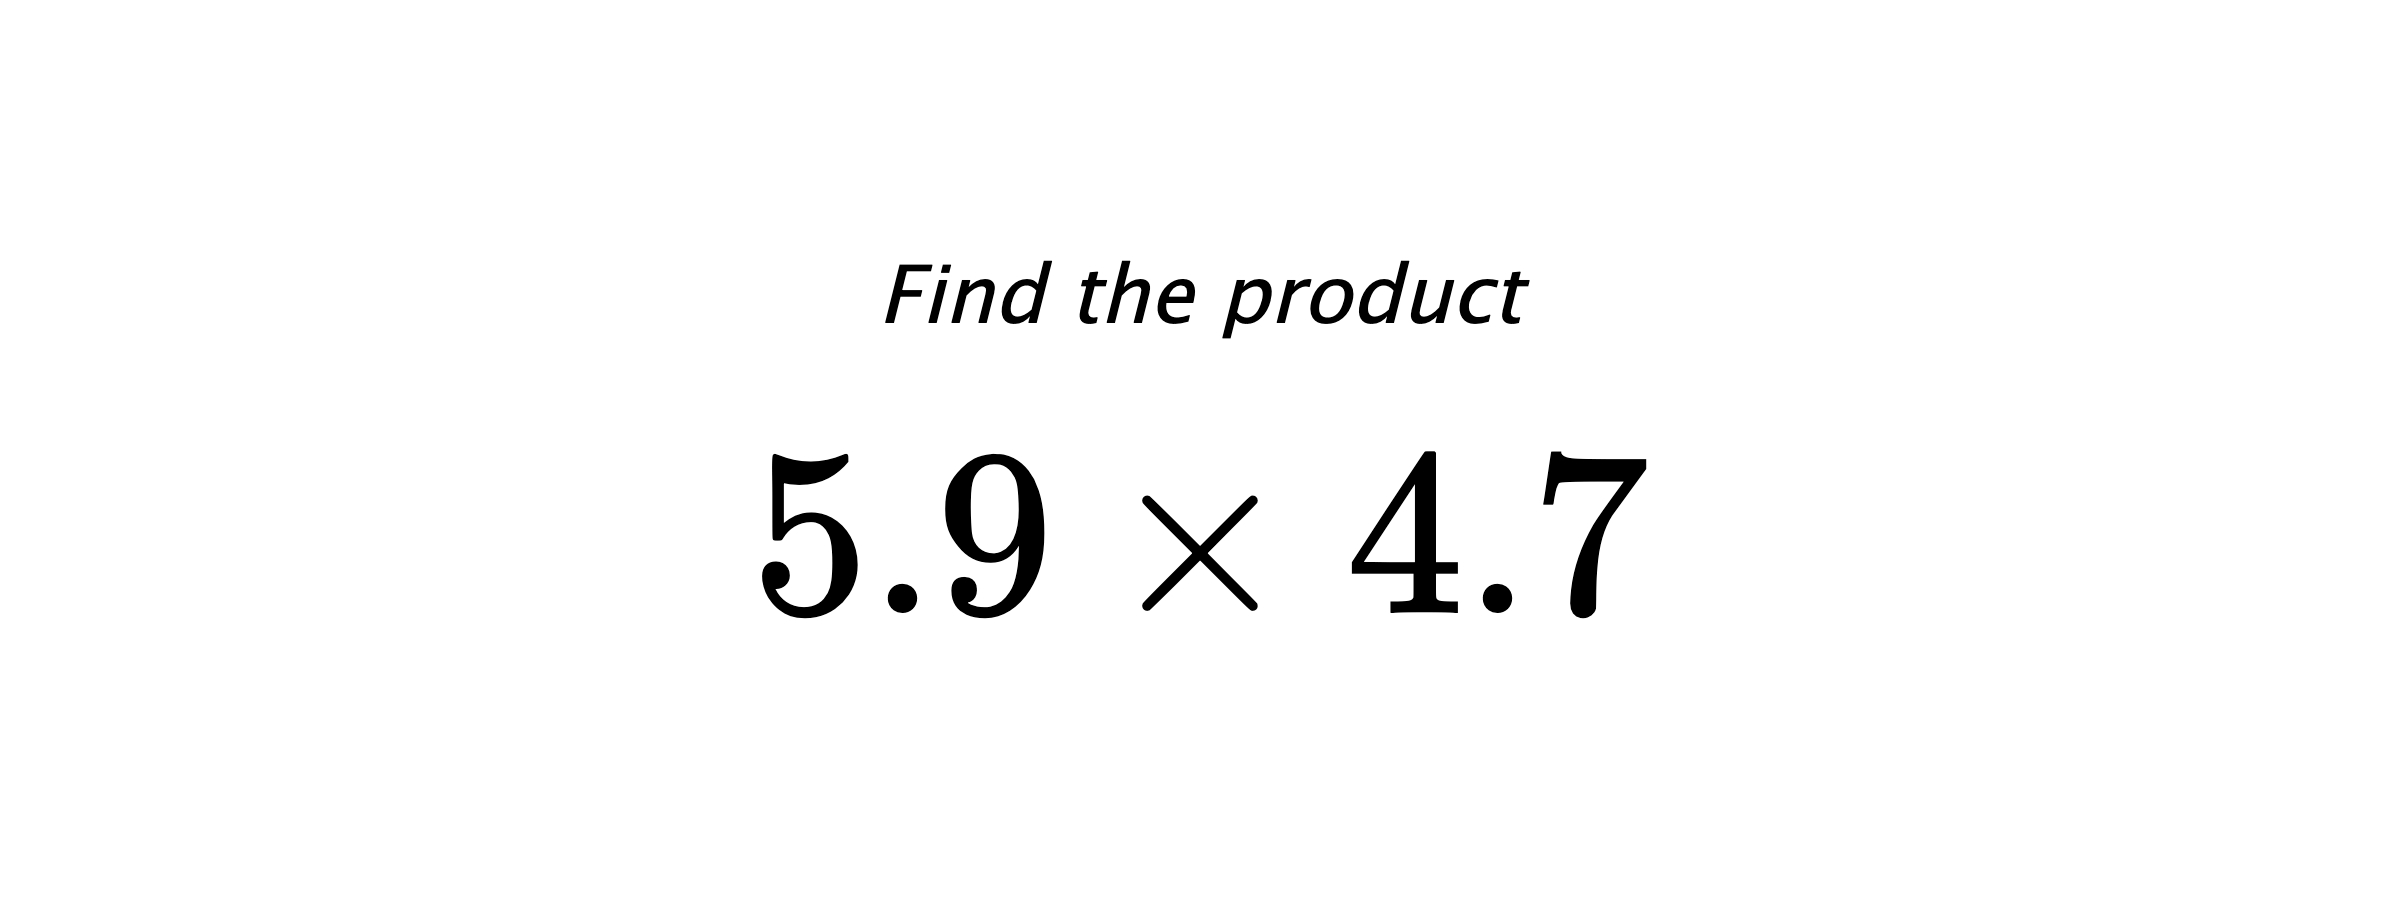 Find the product $ 5.9 \times 4.7 $